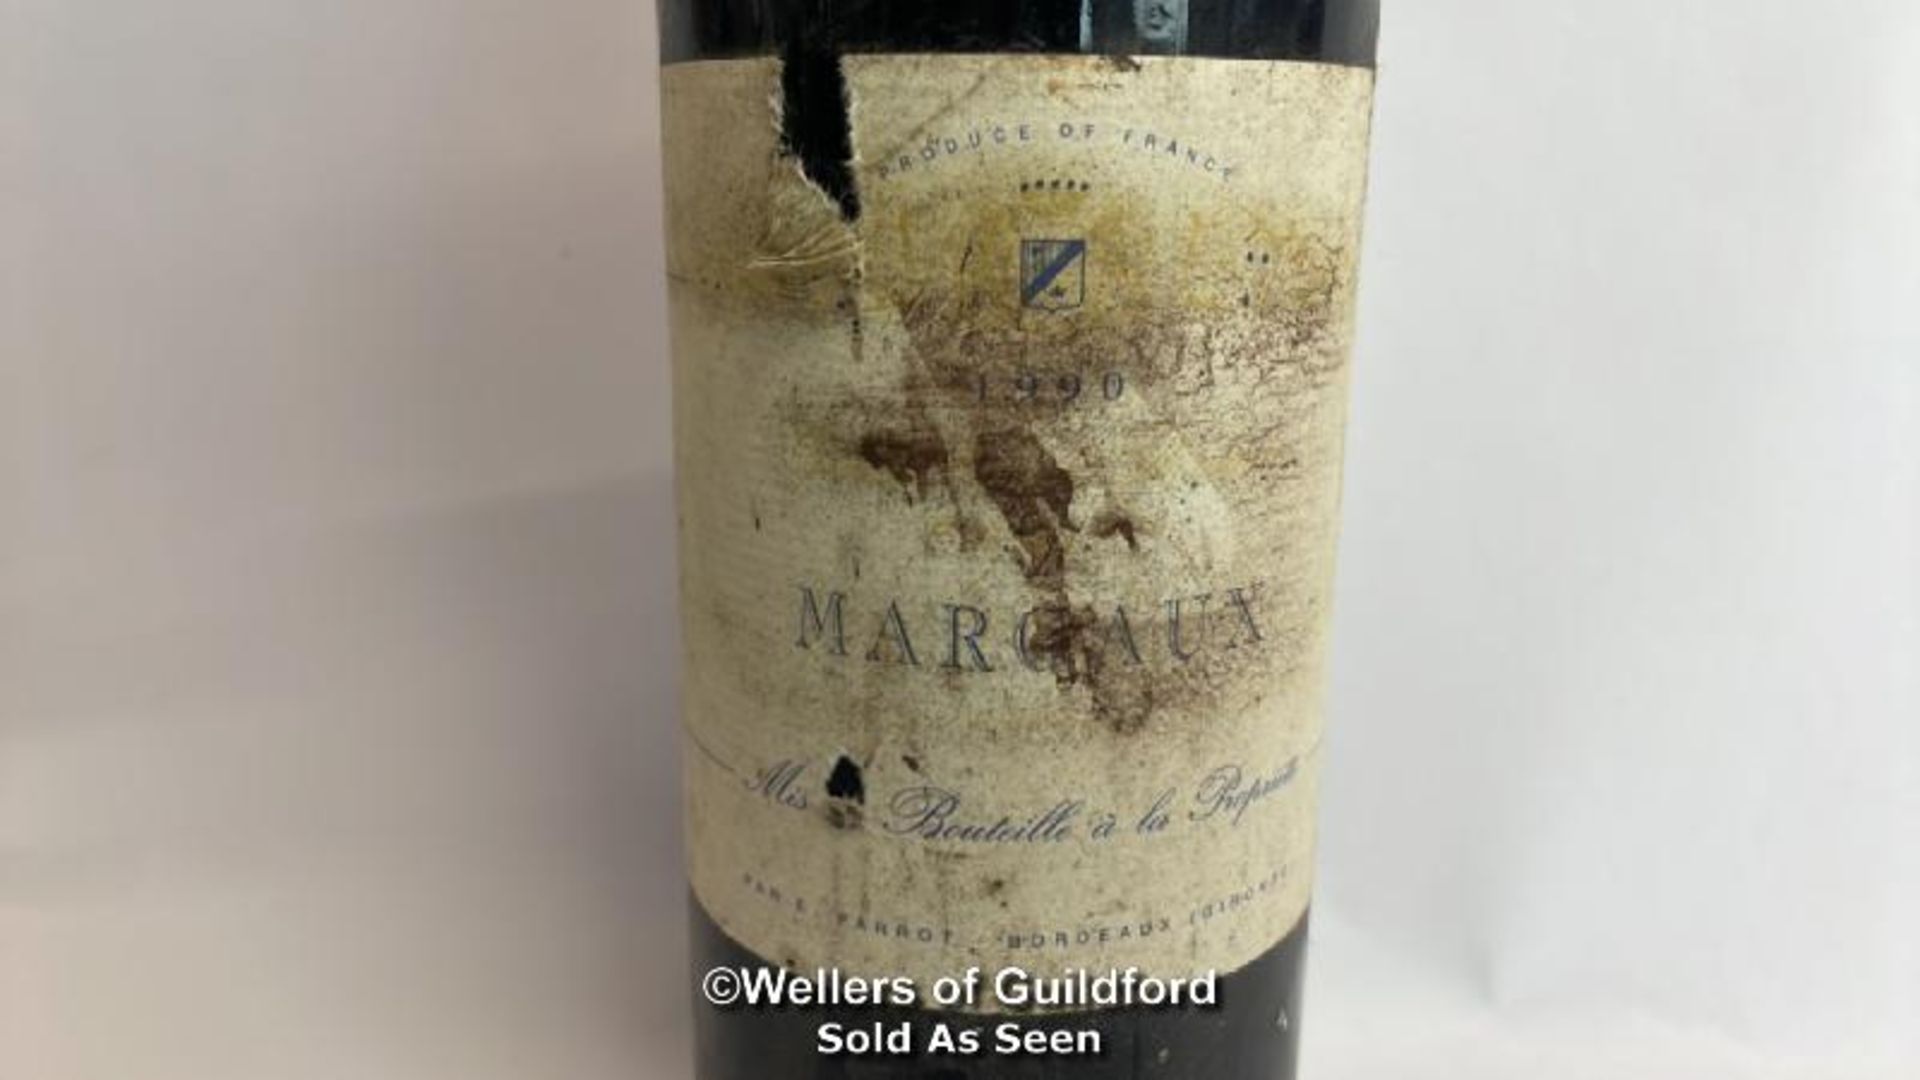 1990 Margaux Par E Parrot Bordeaux (Gironde), 75cl, 12% vol / Please see images for fill level and - Image 4 of 12